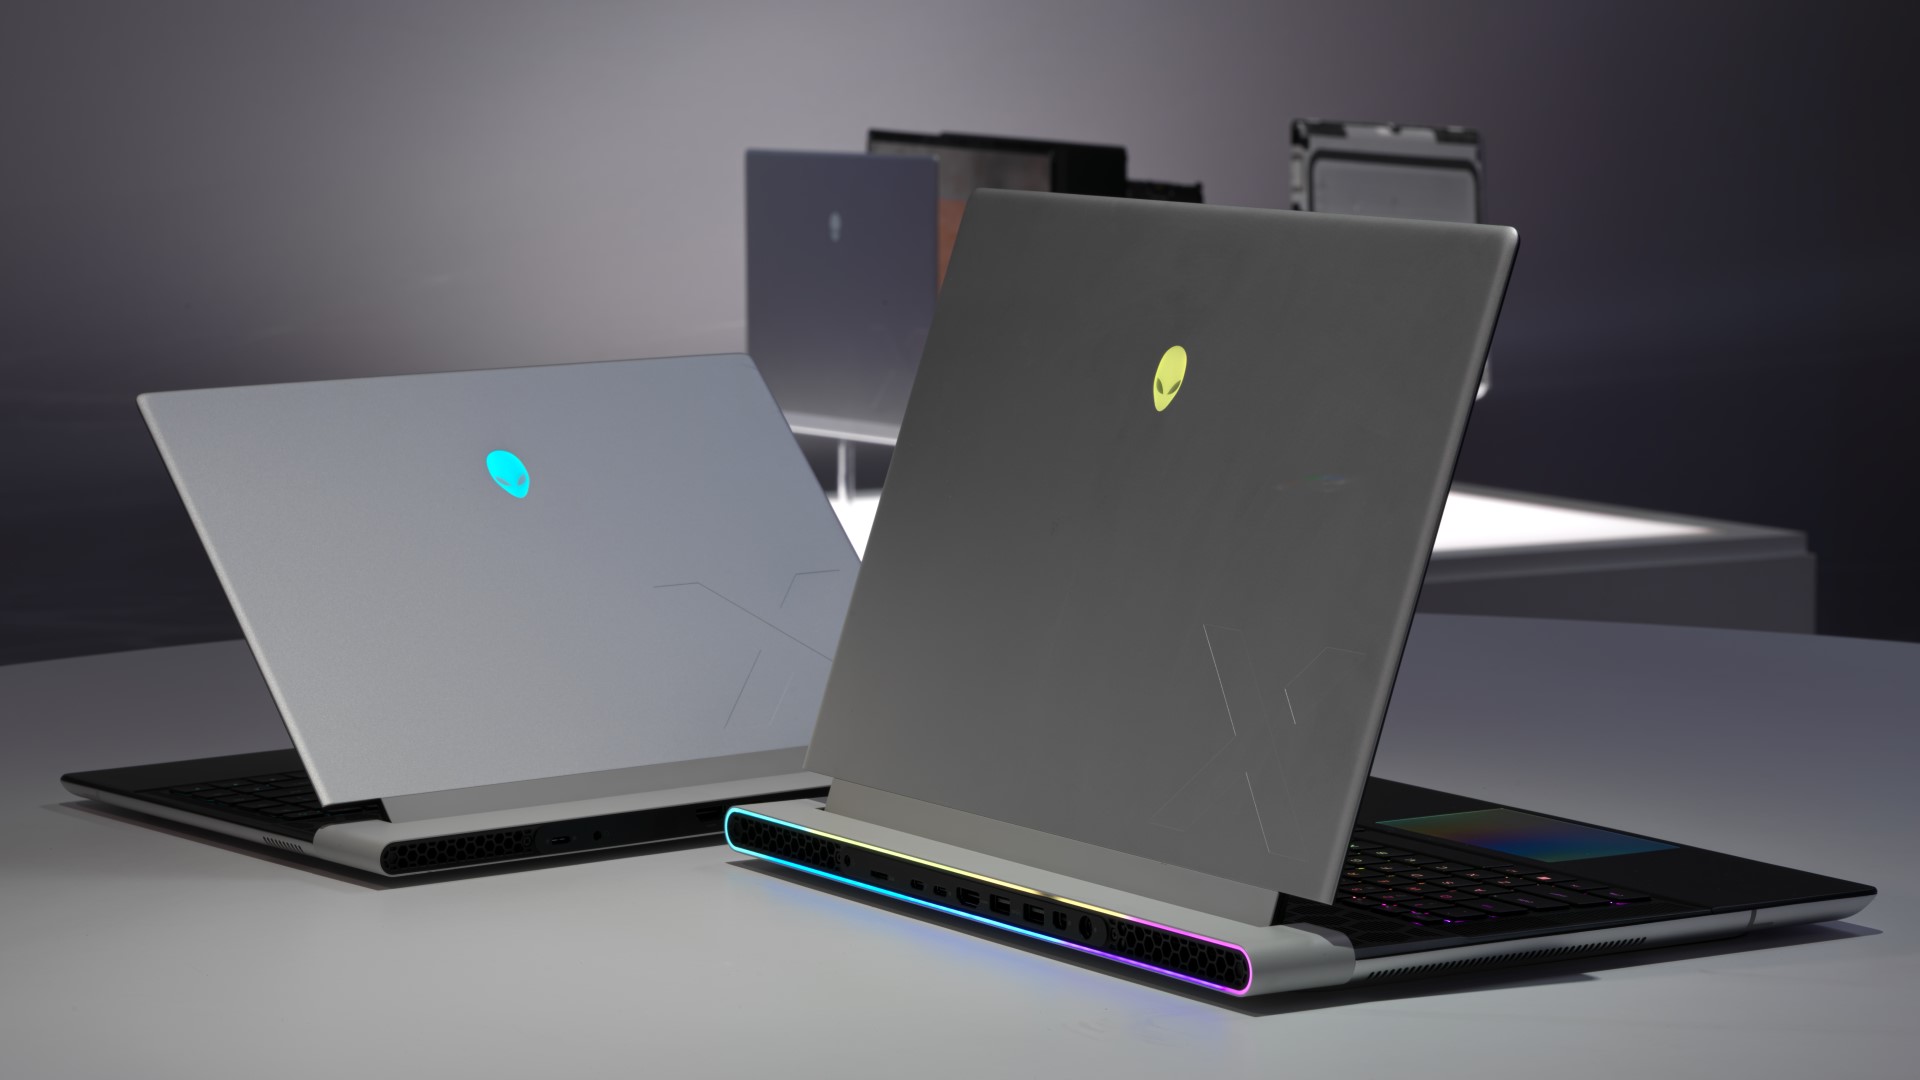 Every brandnew Alienware pc gaming laptop computer revealed at CES 2023